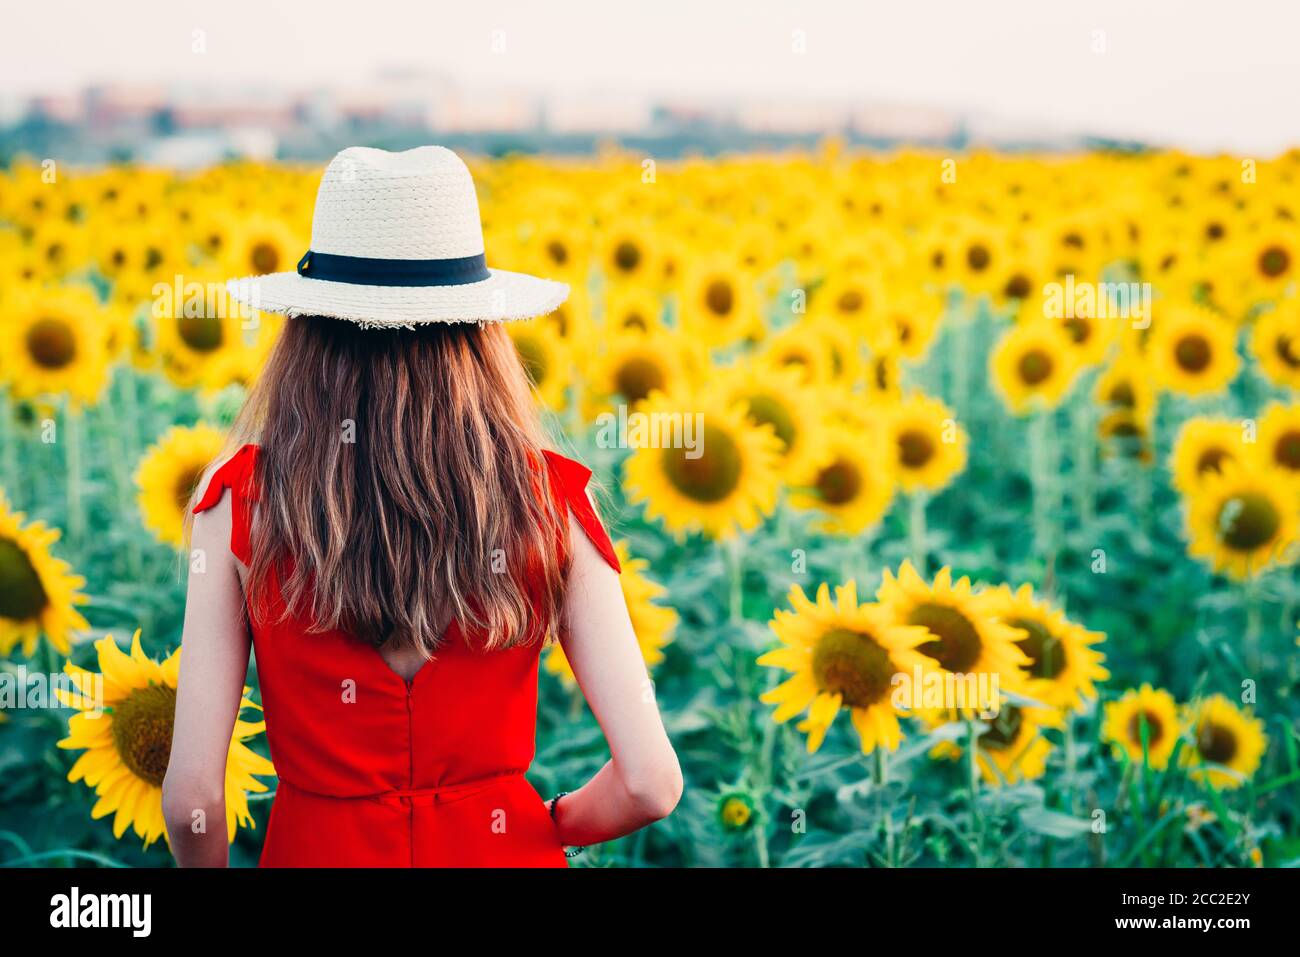 woman in red dress and hat entering sunflower field. Stock Photo